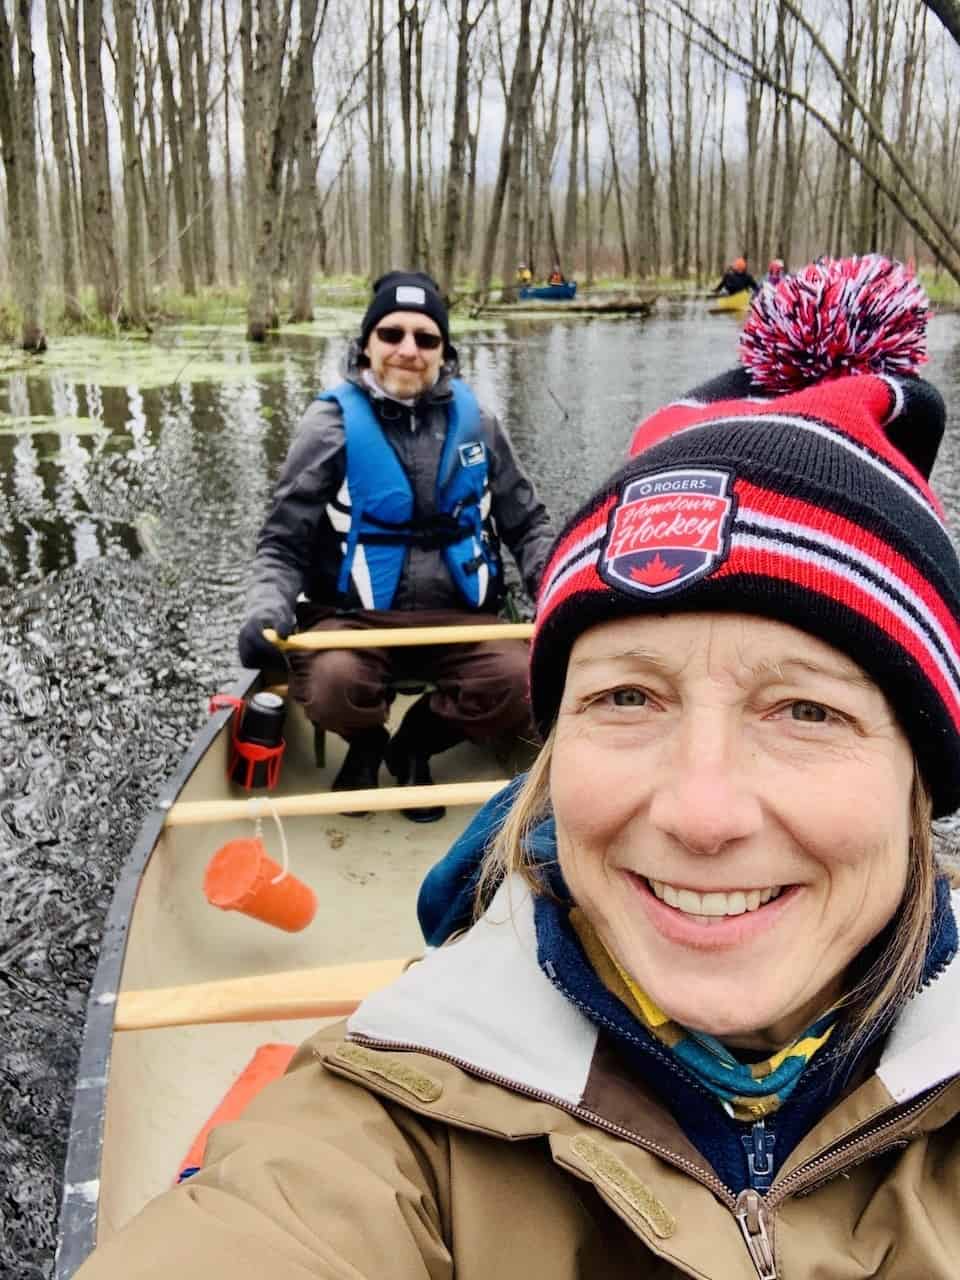 Canoe Selfie on Spencer Creek in Ontario Canada - We bundled up to stay warm during our paddle through the Spencer Creek in Flamborough, Ontario, Canada.